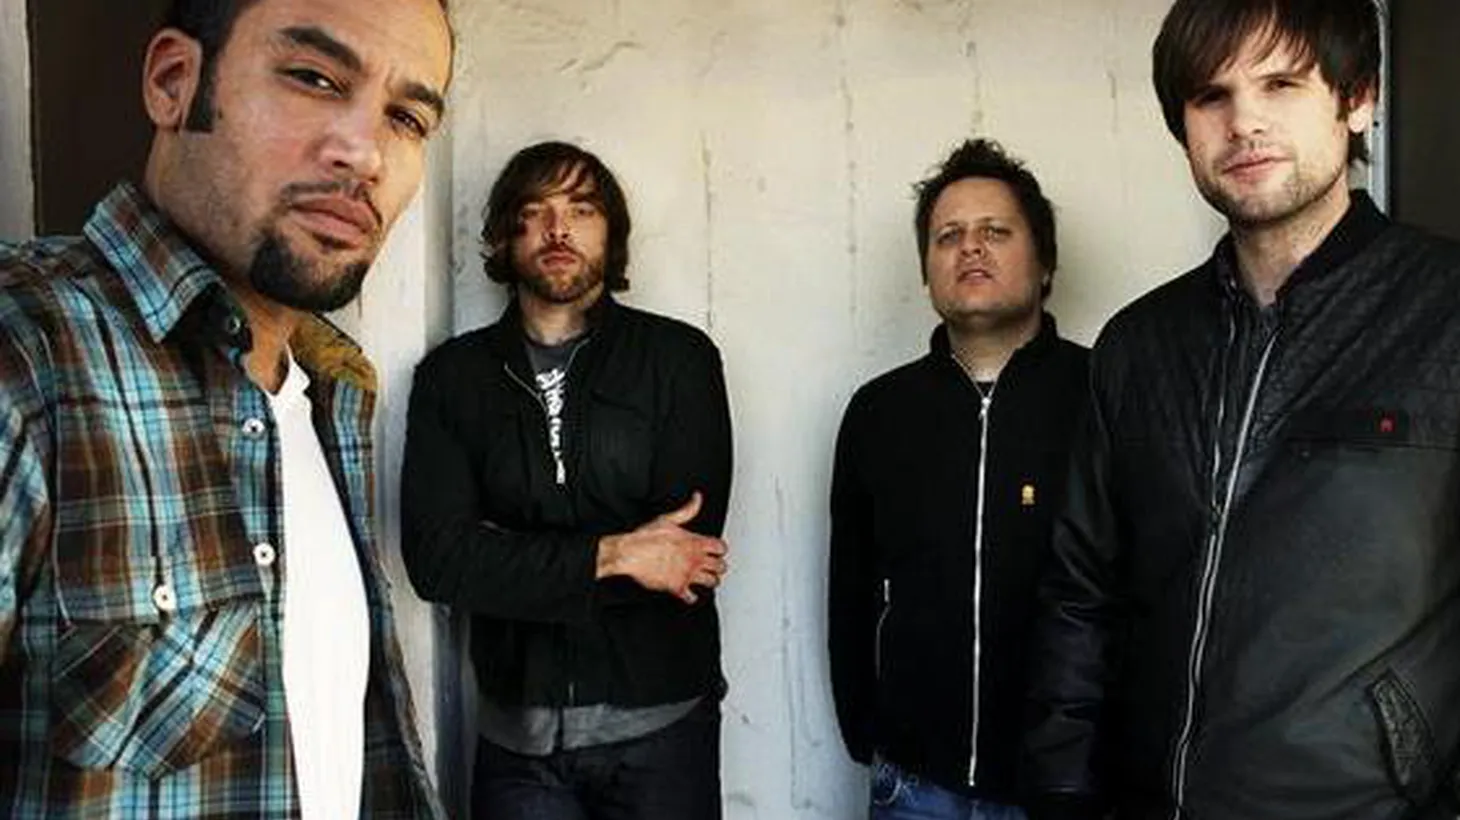 Ben Harper and Relentless7 return to Morning Becomes Eclectic at 11:15am.